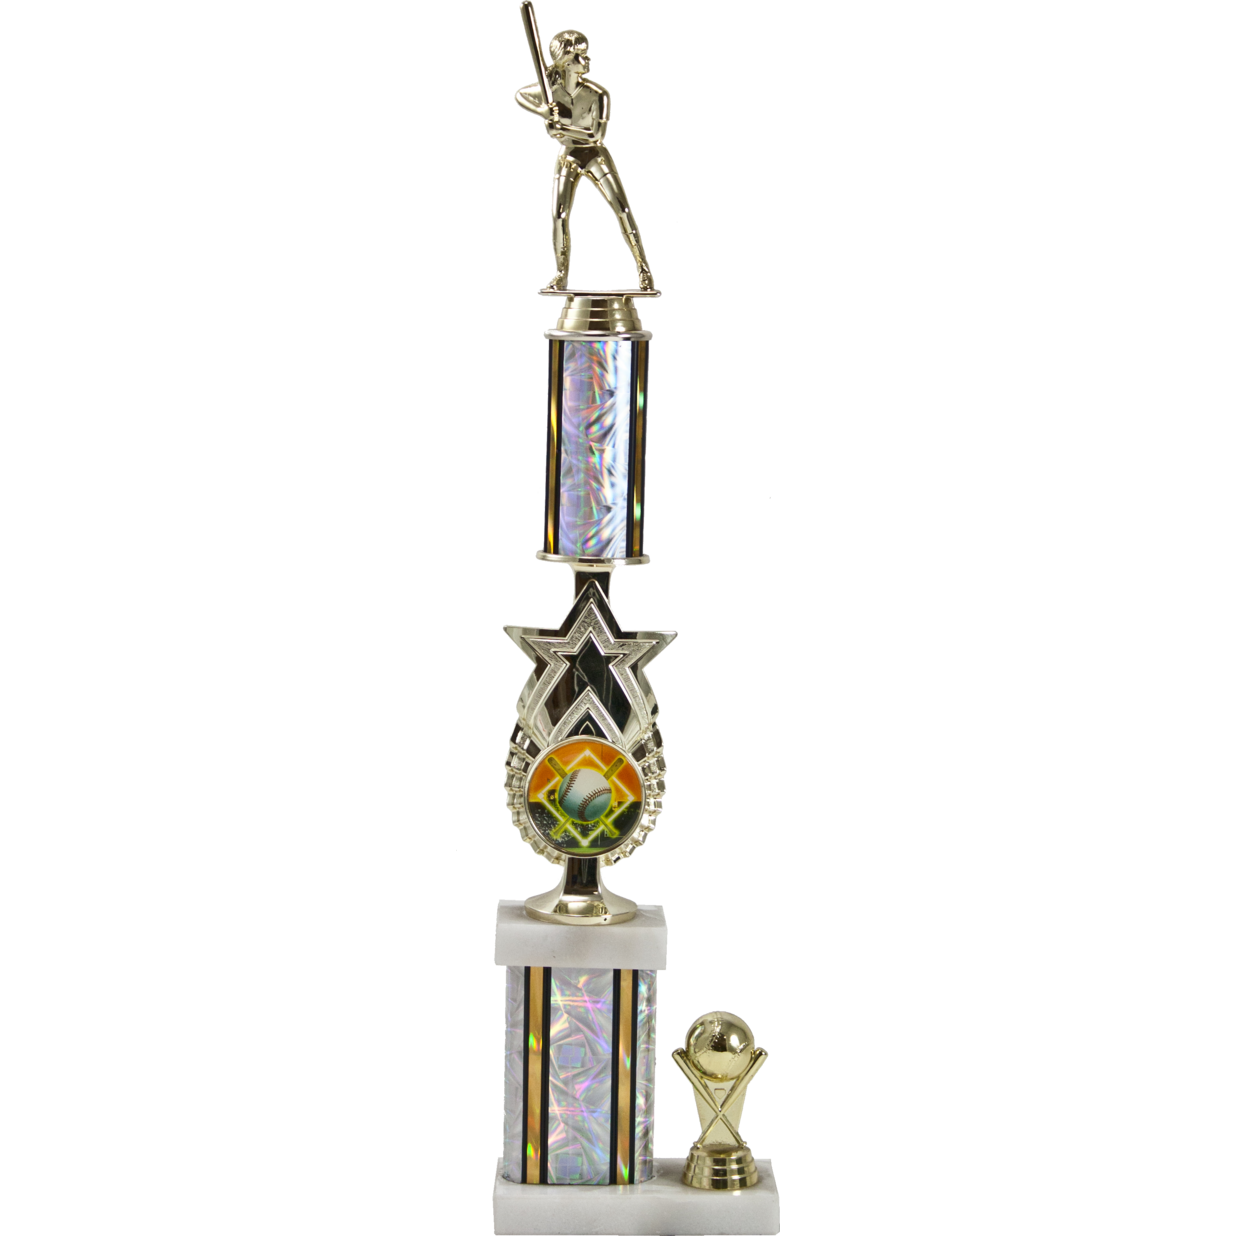 2 Tier Trophy with Star Riser - 21" - Nothers